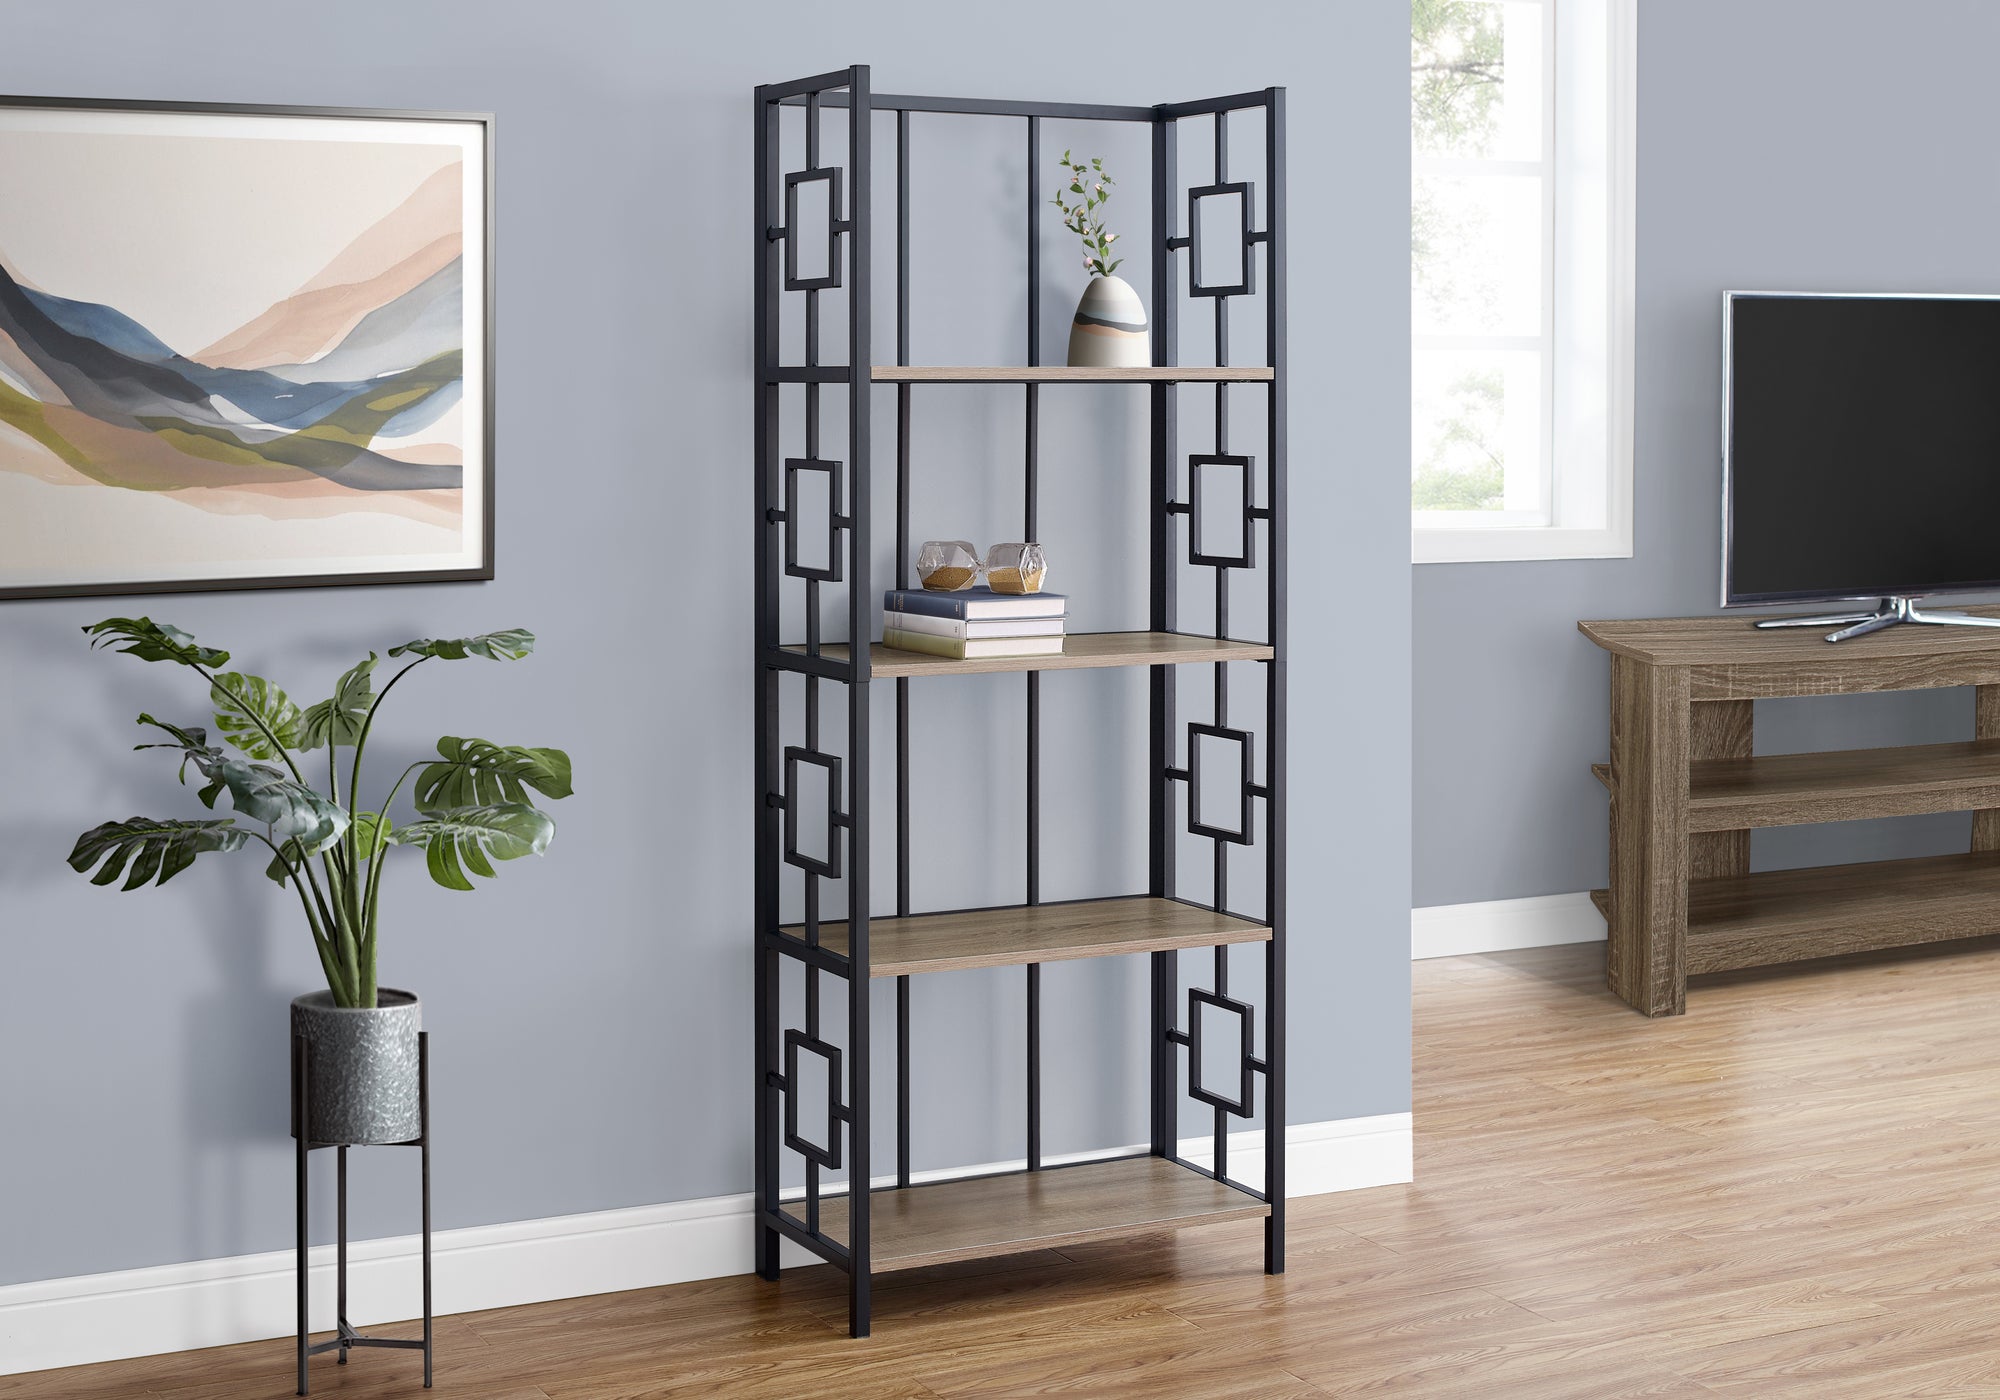 I 3616 - BOOKCASE - 62"H / DARK TAUPE / BLACK METAL ETAGERE BYMONARCH SPECIALTIES INC